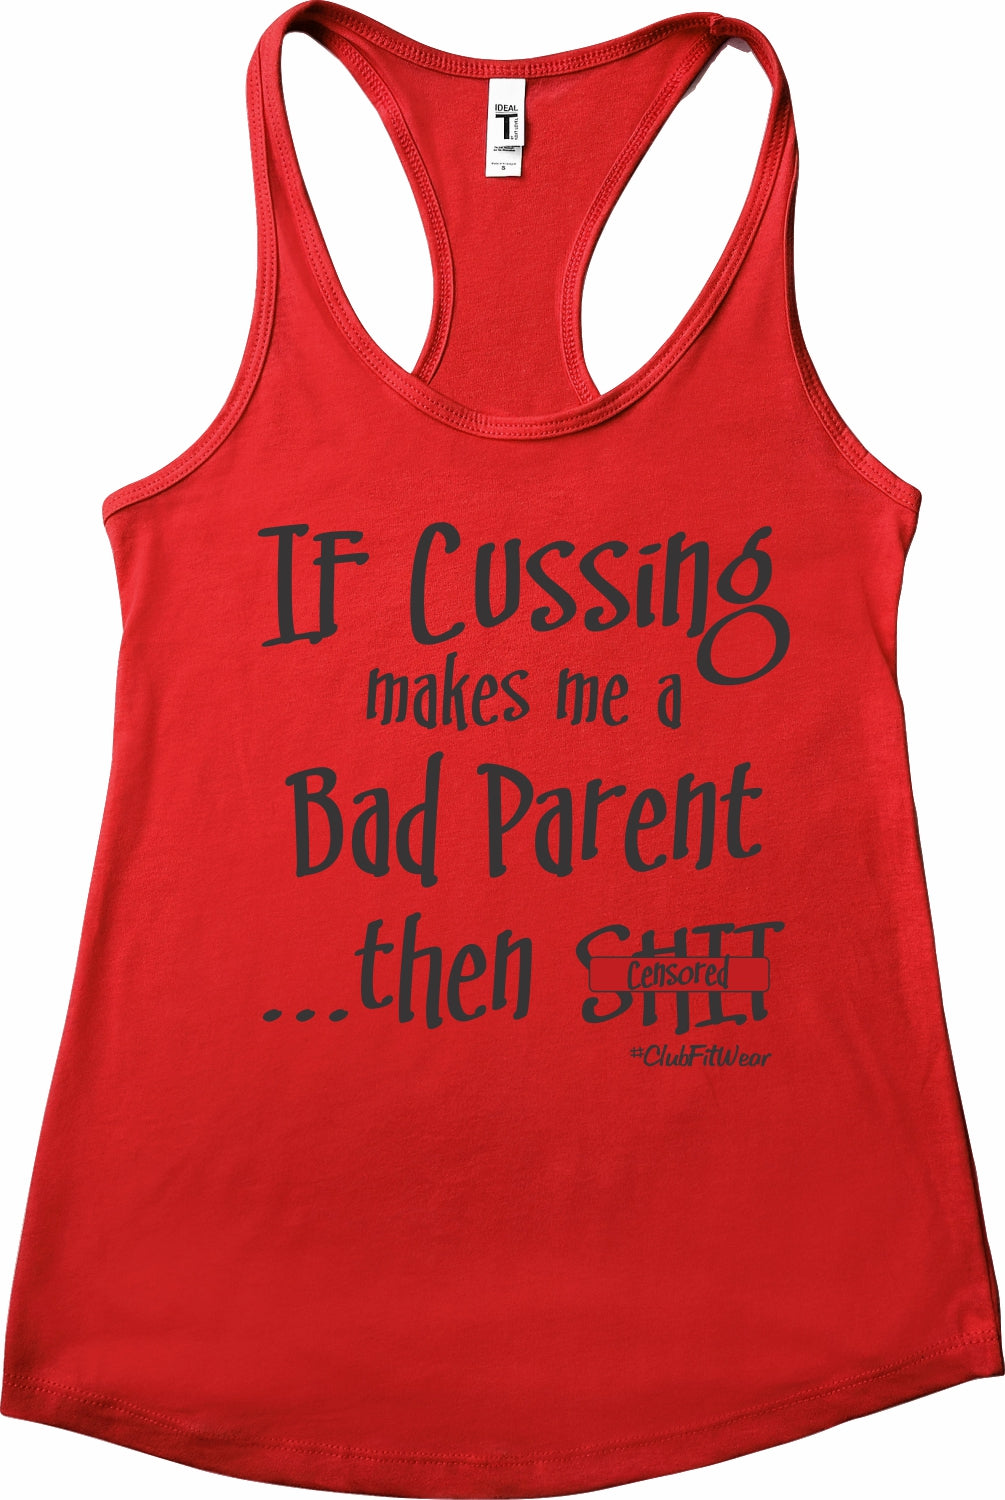 If Cussing makes me a Bad Parent ...then